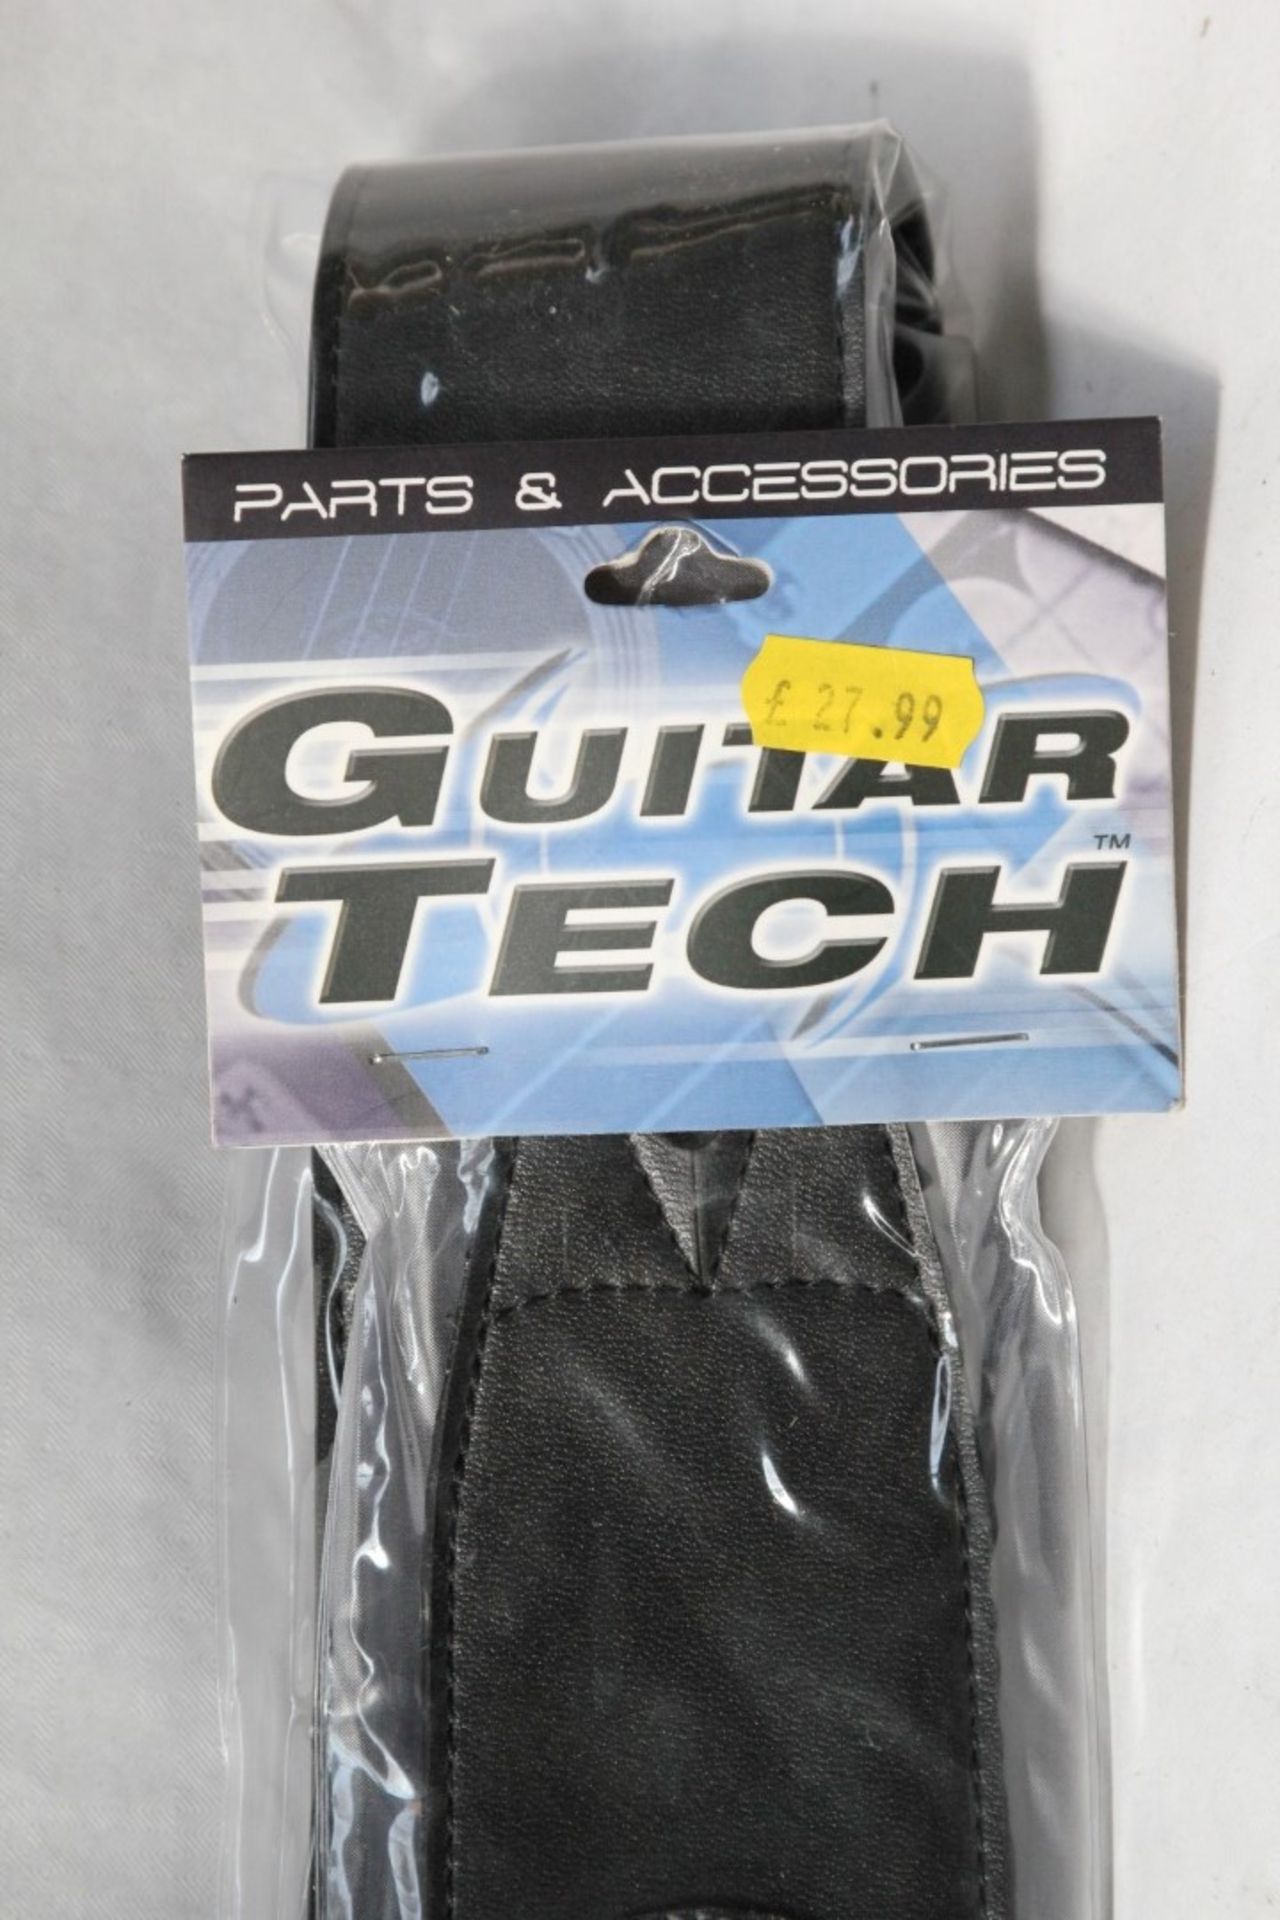 1 x Guitar Tech Leather Studded Guitar Strap - New in Packet - CL020 - Ref Pro173 - Location: Altrin - Image 3 of 8